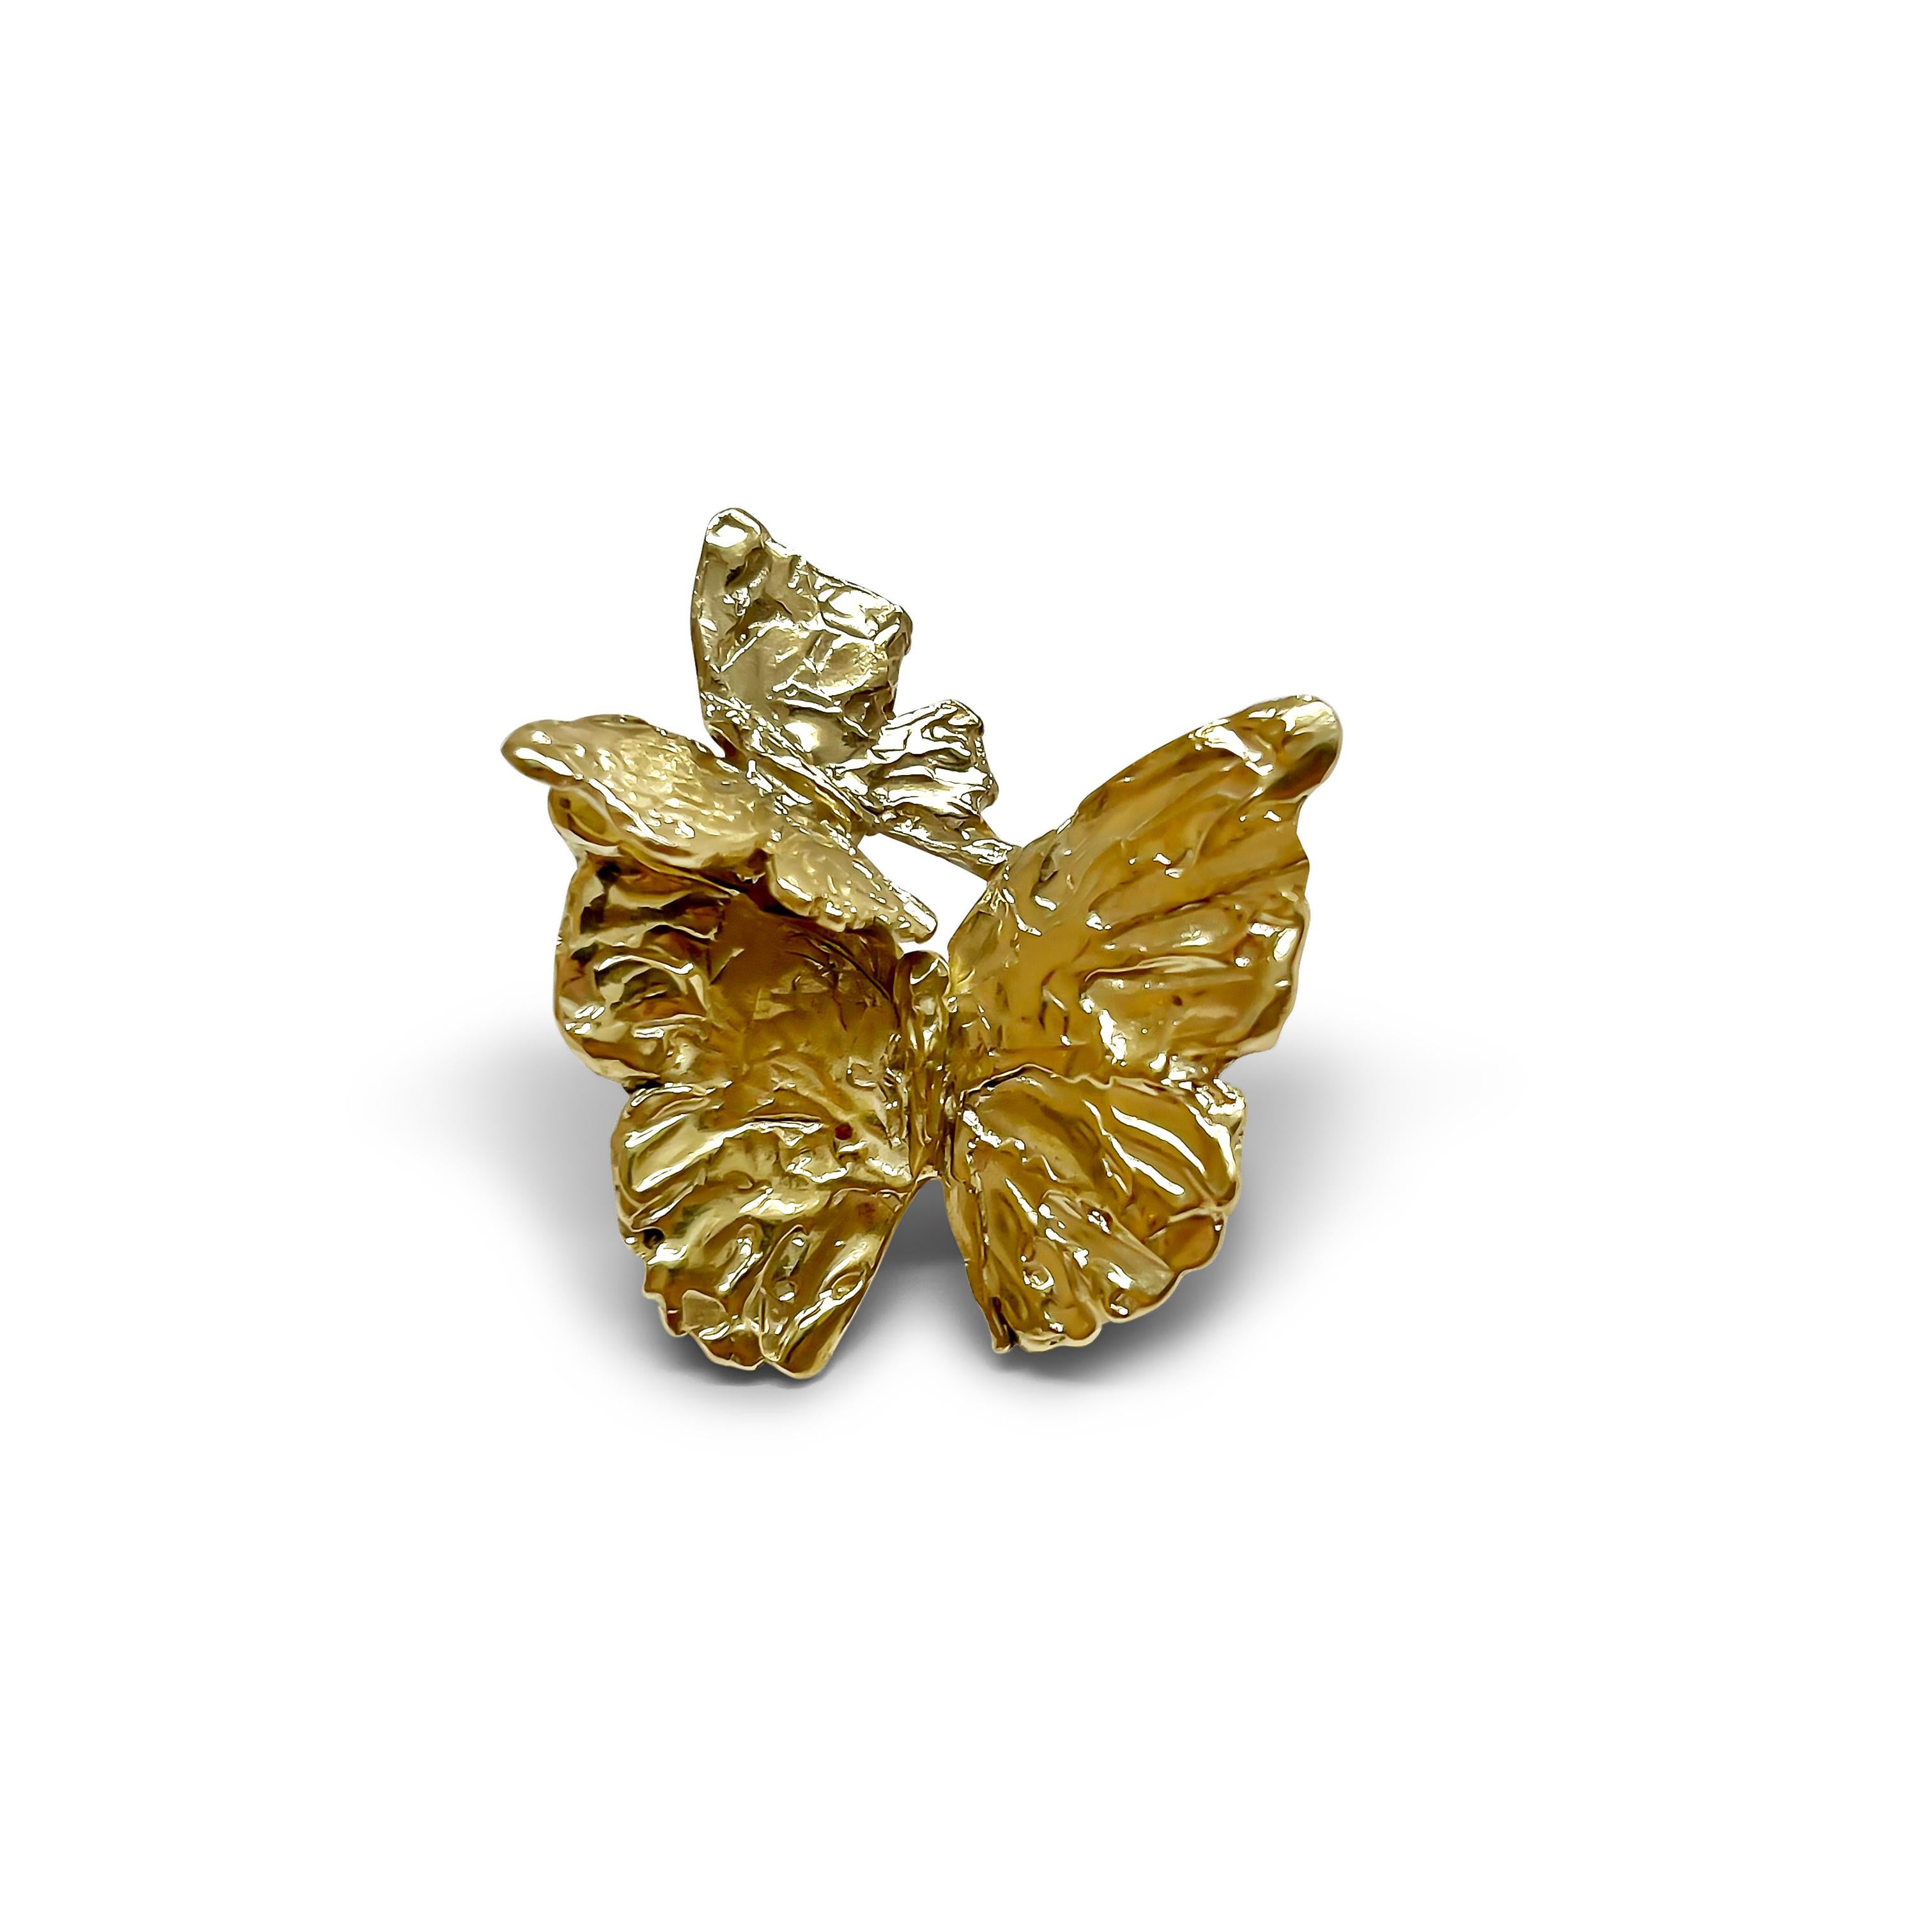 Intention: Double the Impact

Design: Medium and small butterflies perch gently on the ear, a reminder for balance and grace, while doubling down on the BELIEVE collection's message of self actualization.

Style Suggestions: Pair with the Butterfly